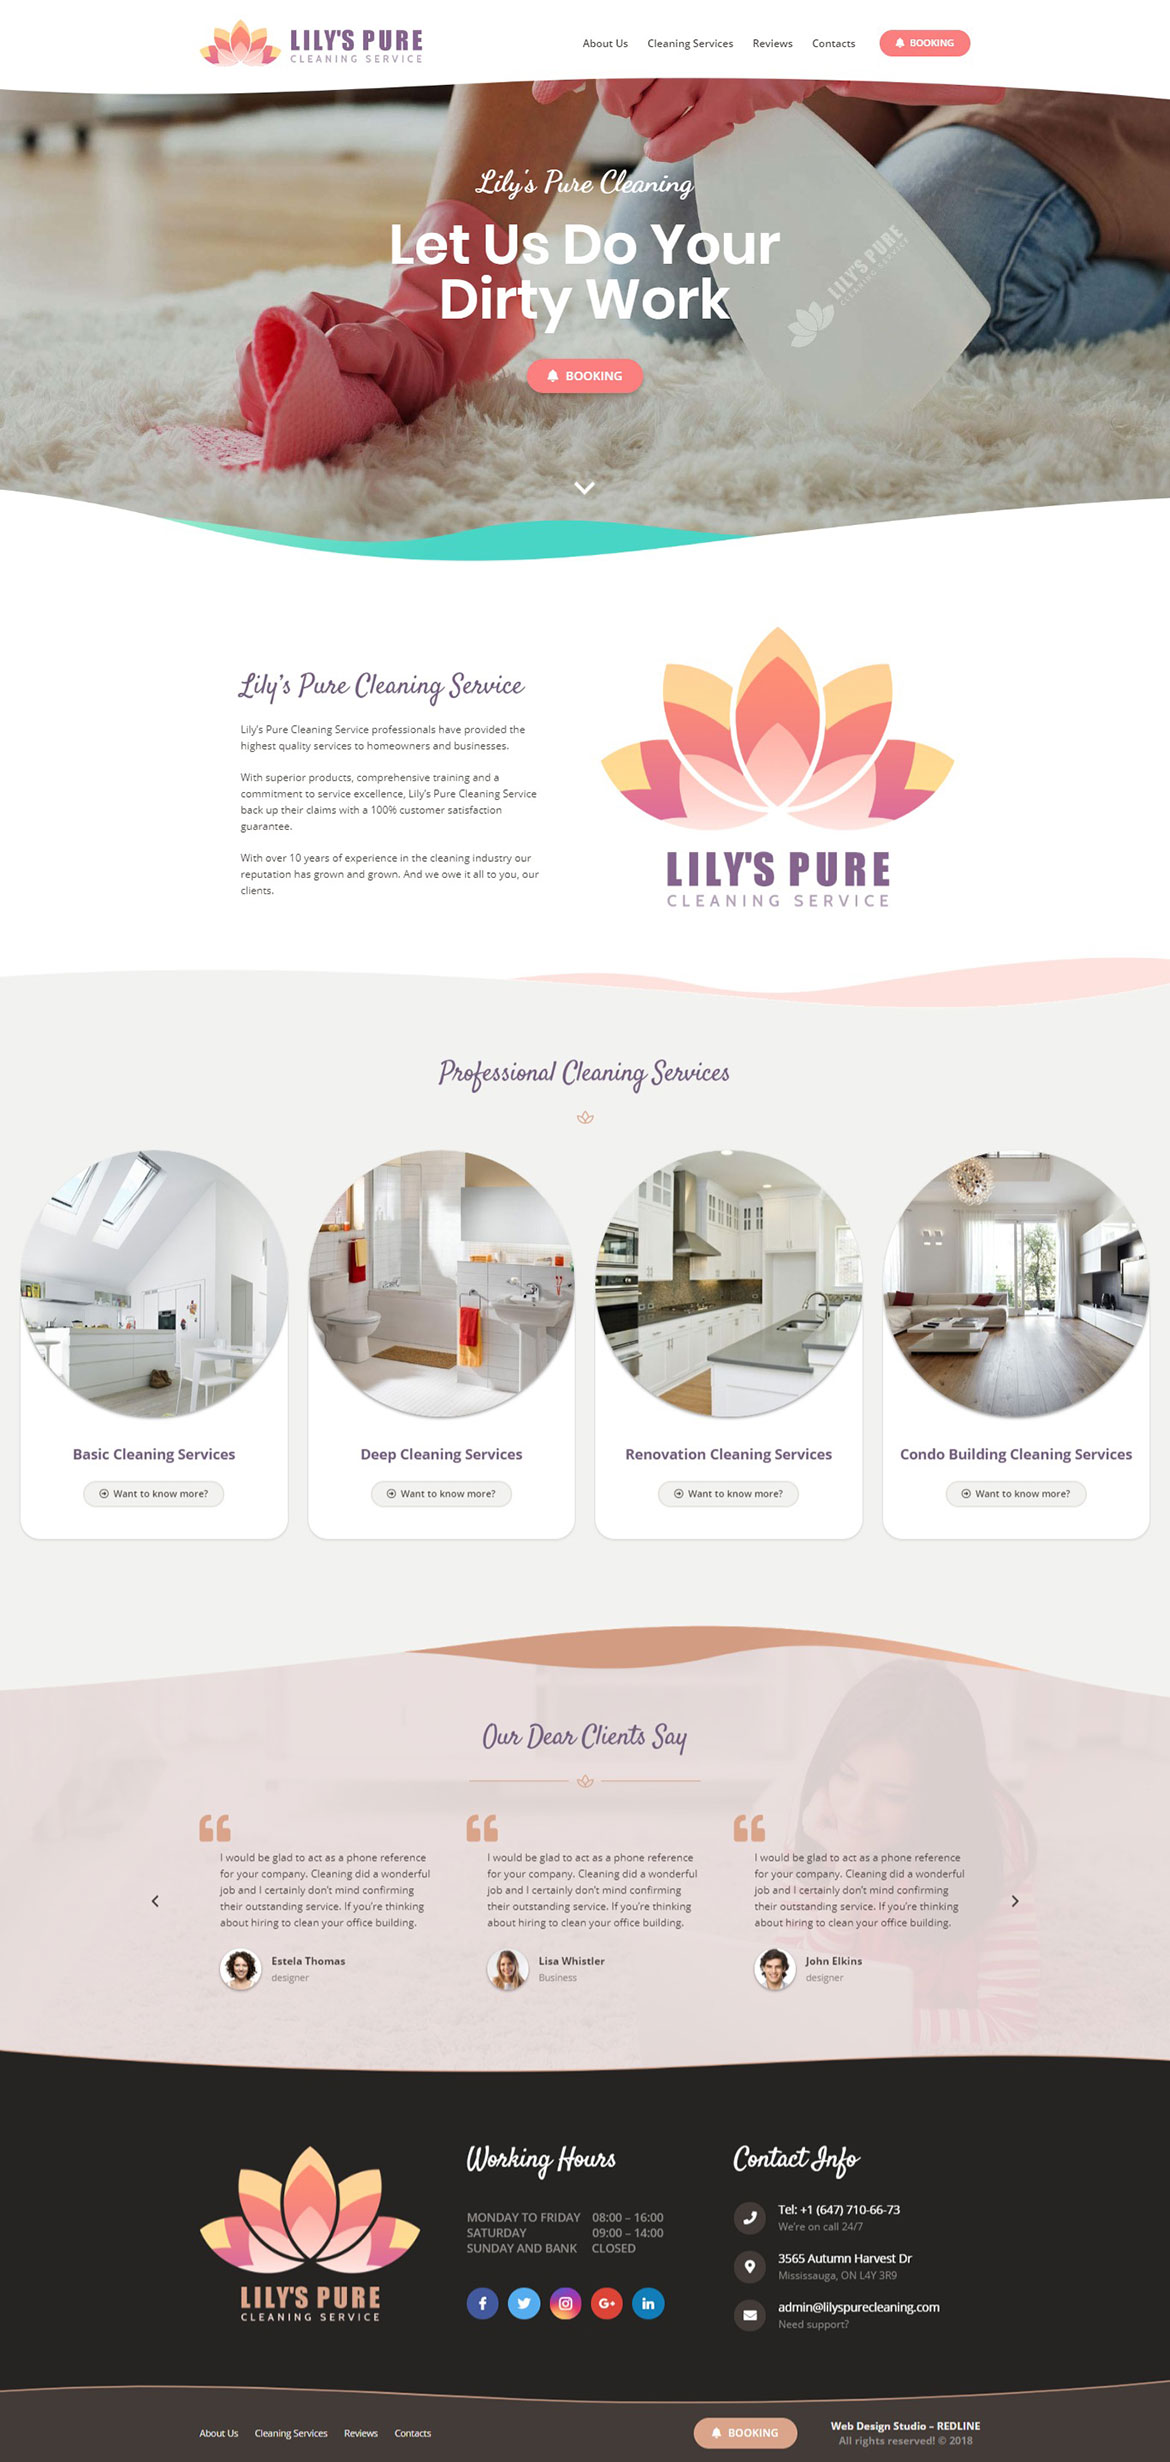 Lilys Pure Cleaning Service